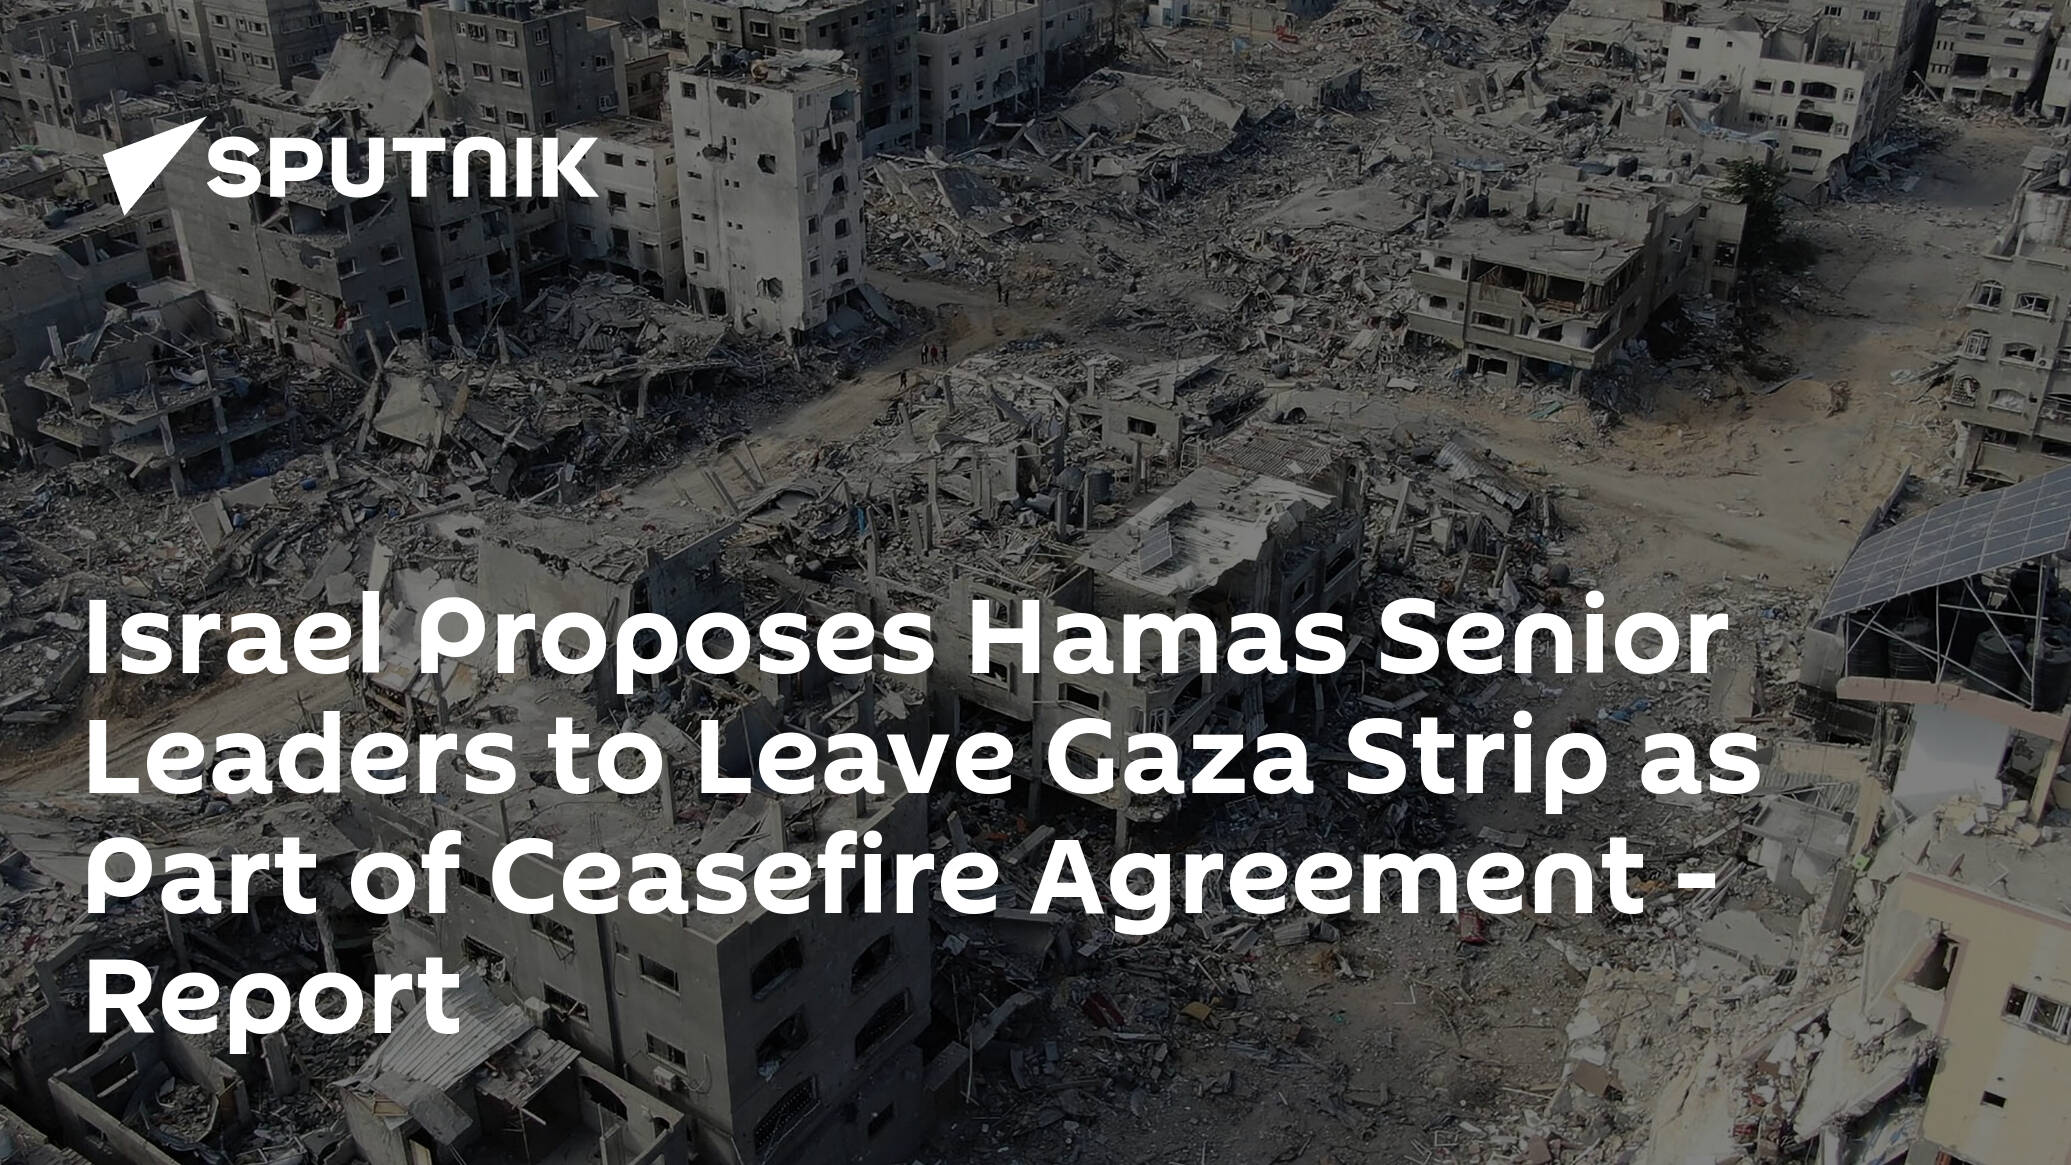 Israel Proposes Hamas Senior Leaders to Leave Gaza Strip as Part of Ceasefire Agreement – Report